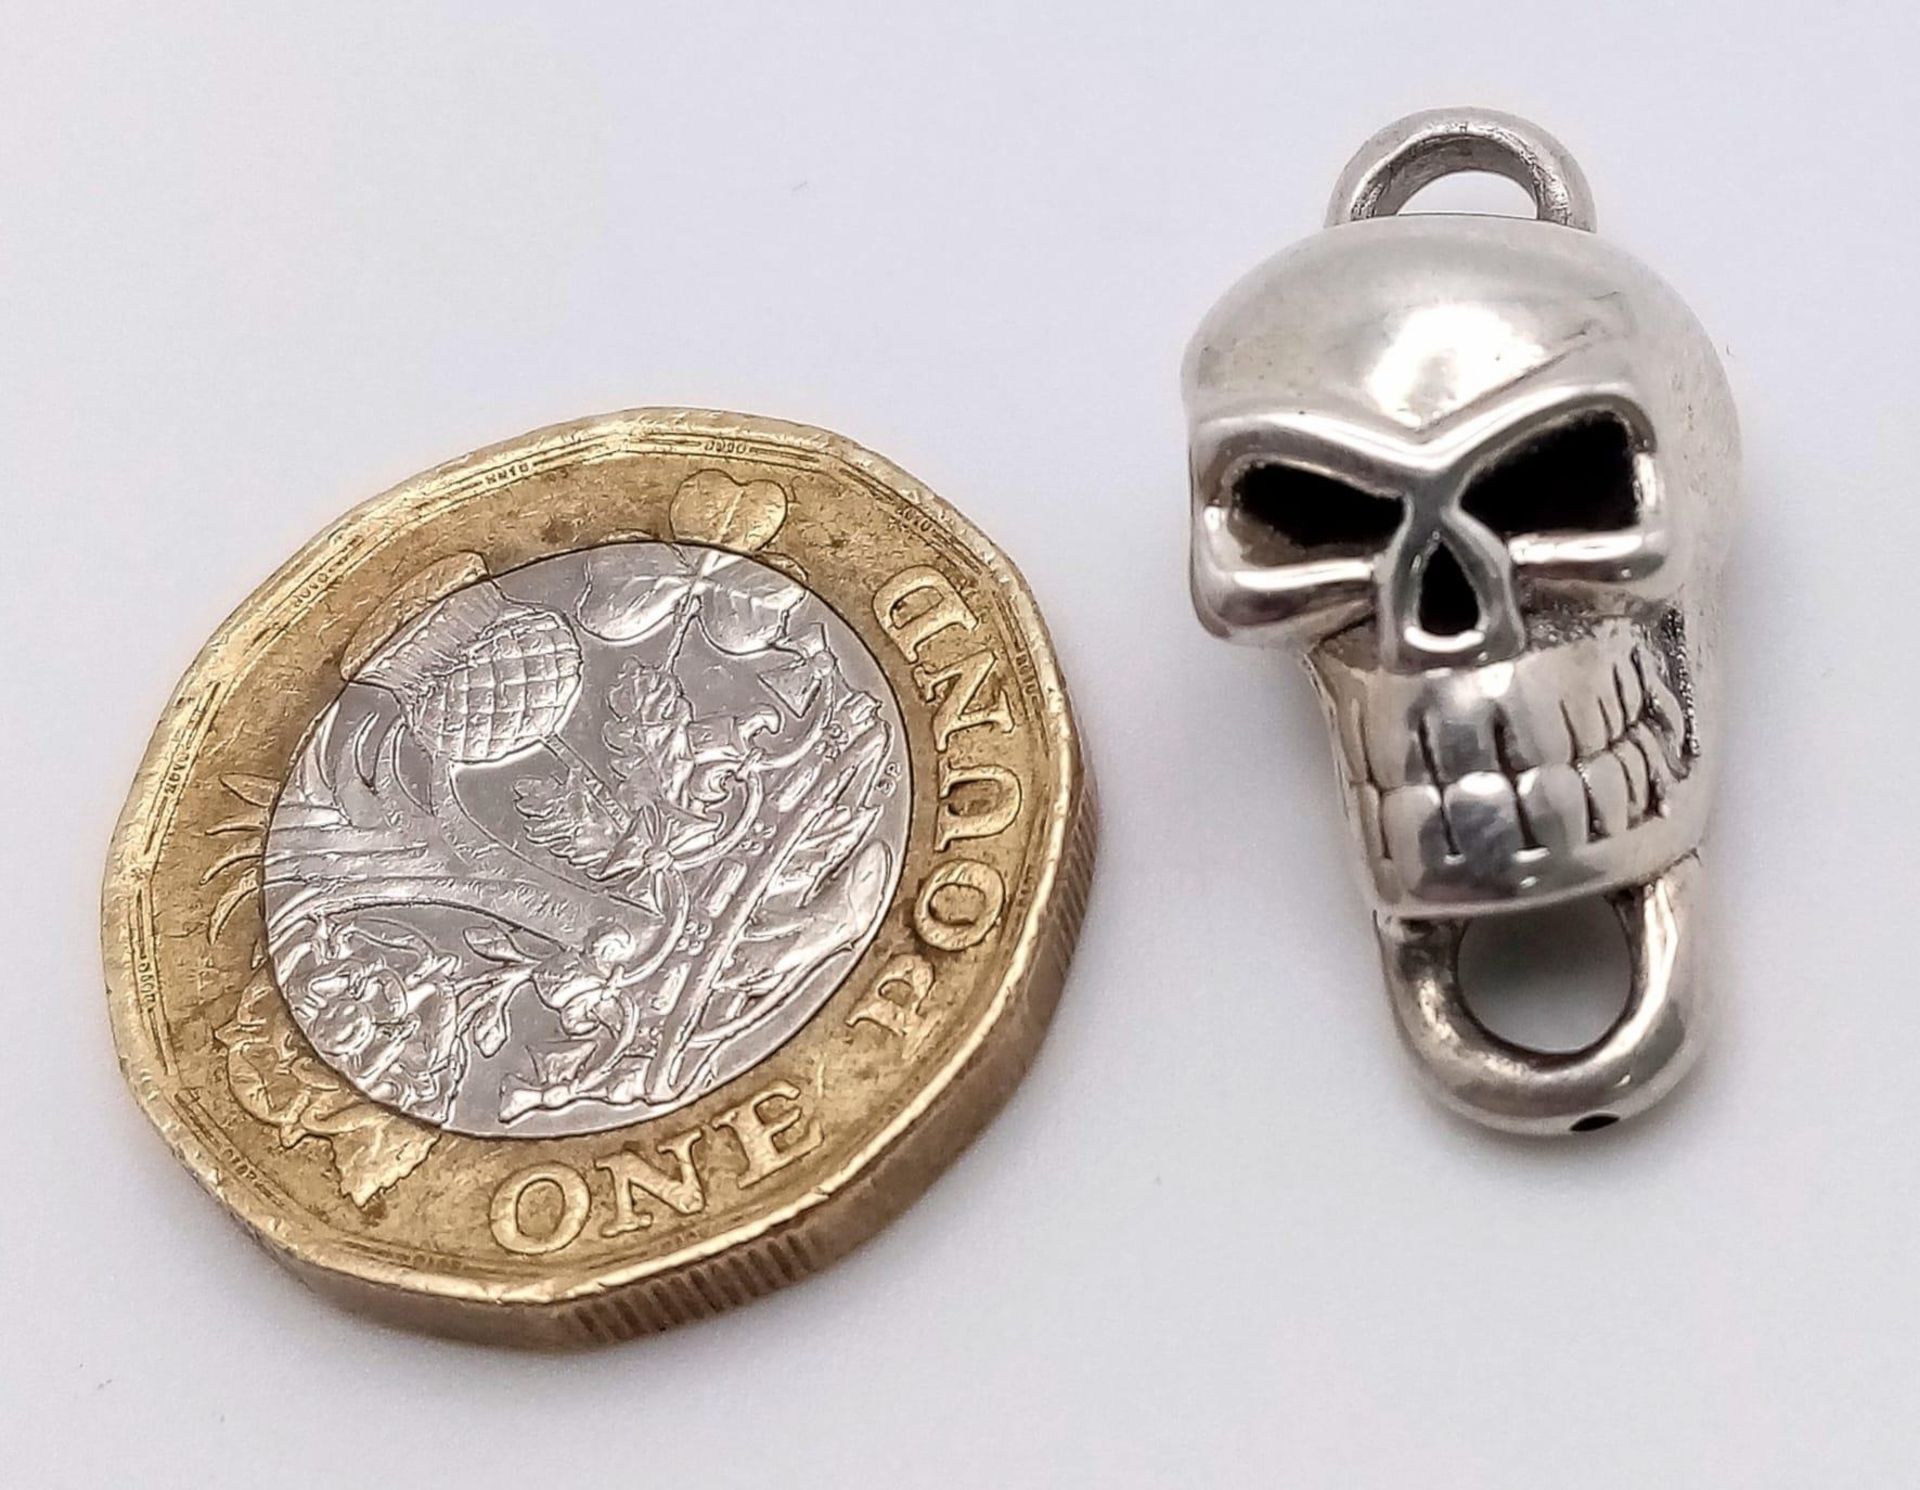 STERLING SILVER (TESTED) SKULL PENDANT/CHARM, WEIGHT 2G, 25MM LONG APPROX, REF SC 4126 - Image 3 of 3